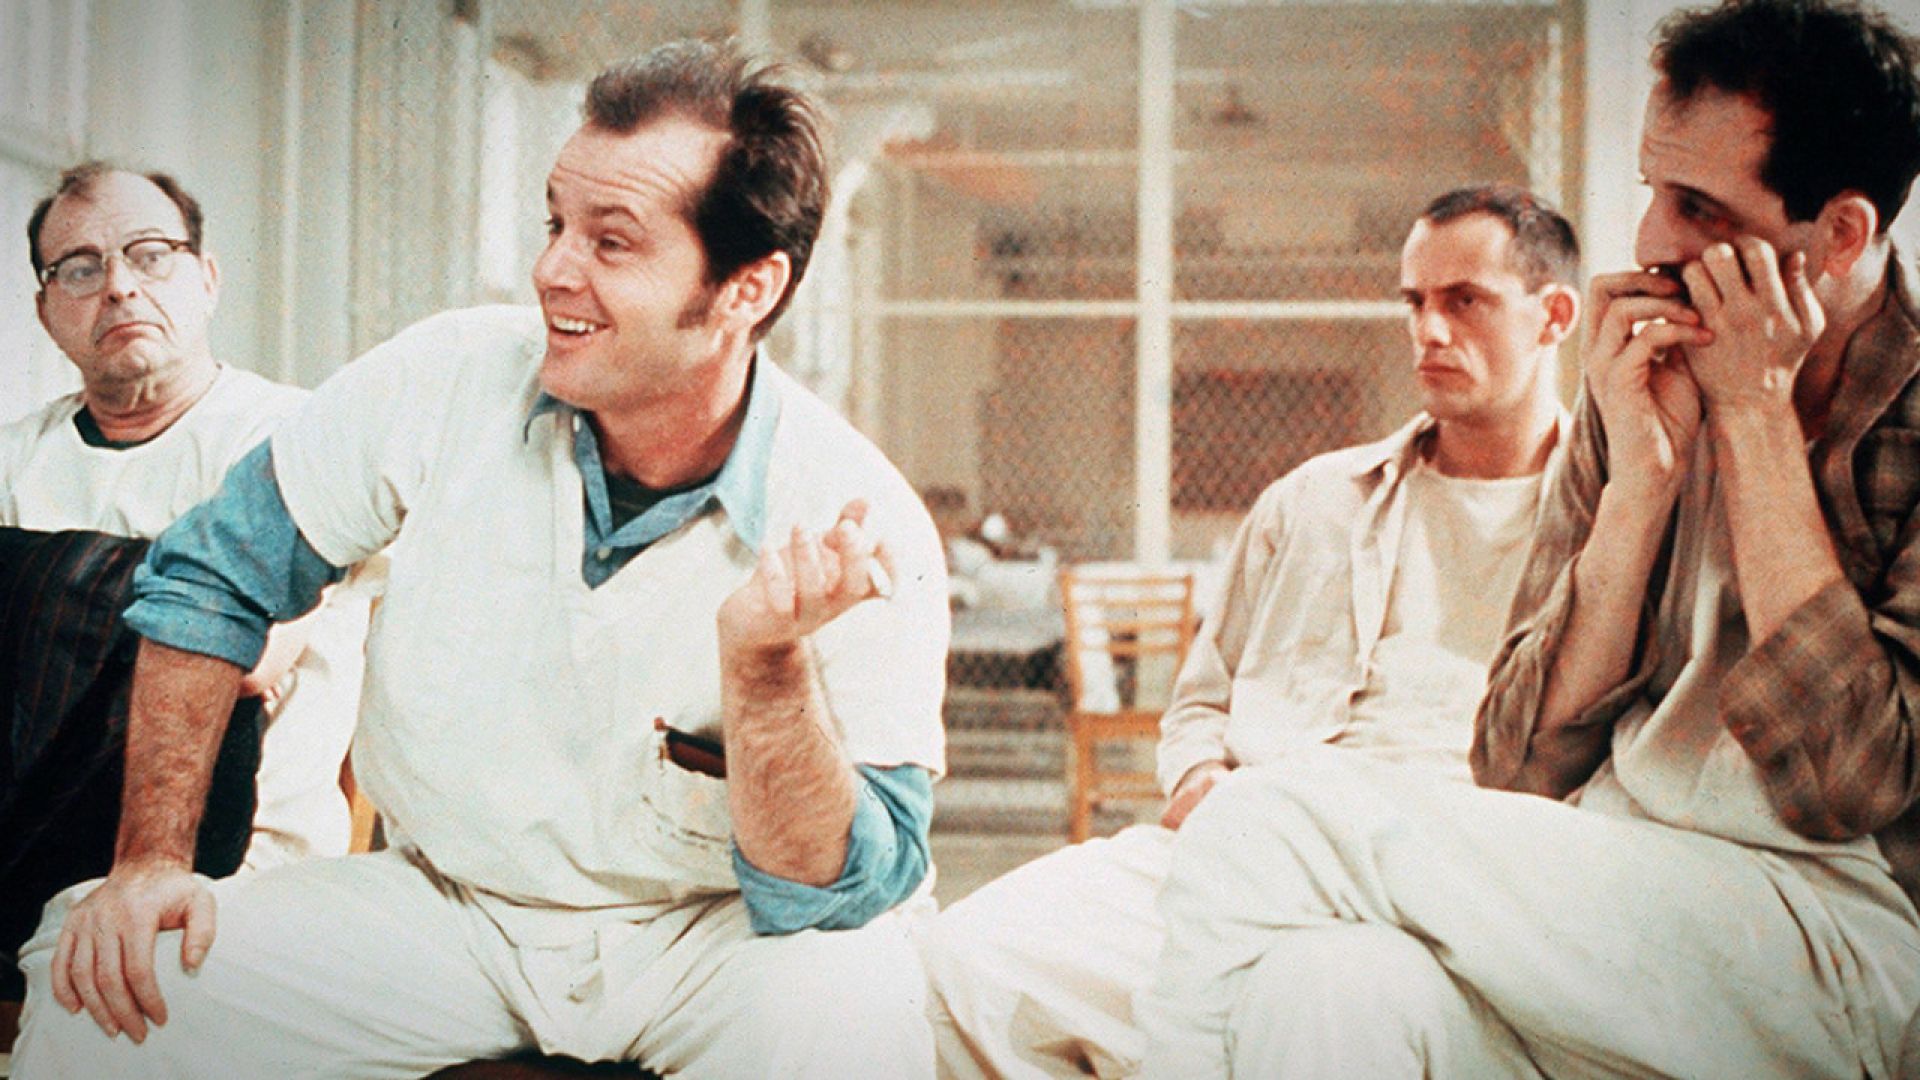 Union Films - Review - One Flew Over The Cuckoo's Nest